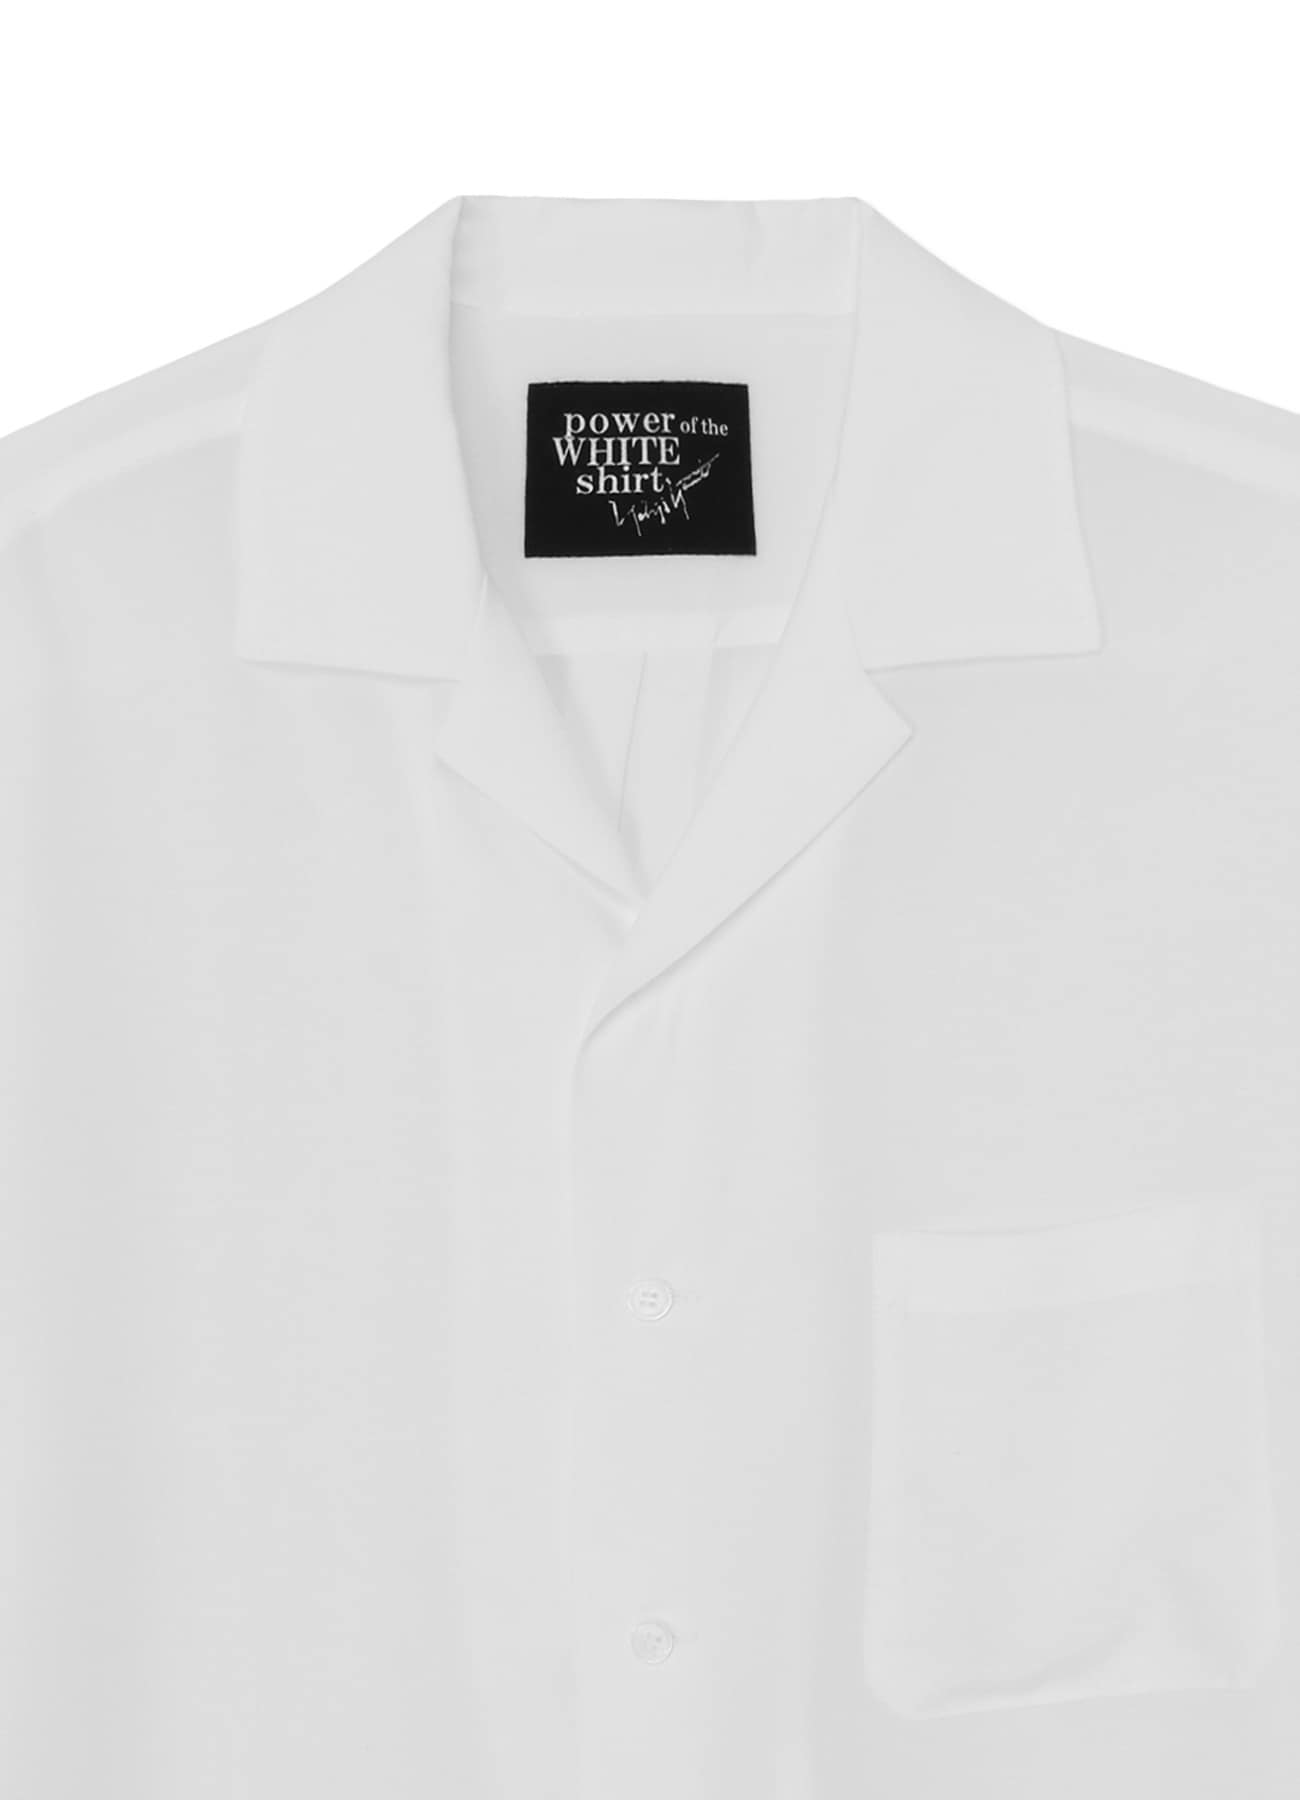 OPEN COLLAR SHIRT(S White): power of the WHITE shirt｜THE SHOP